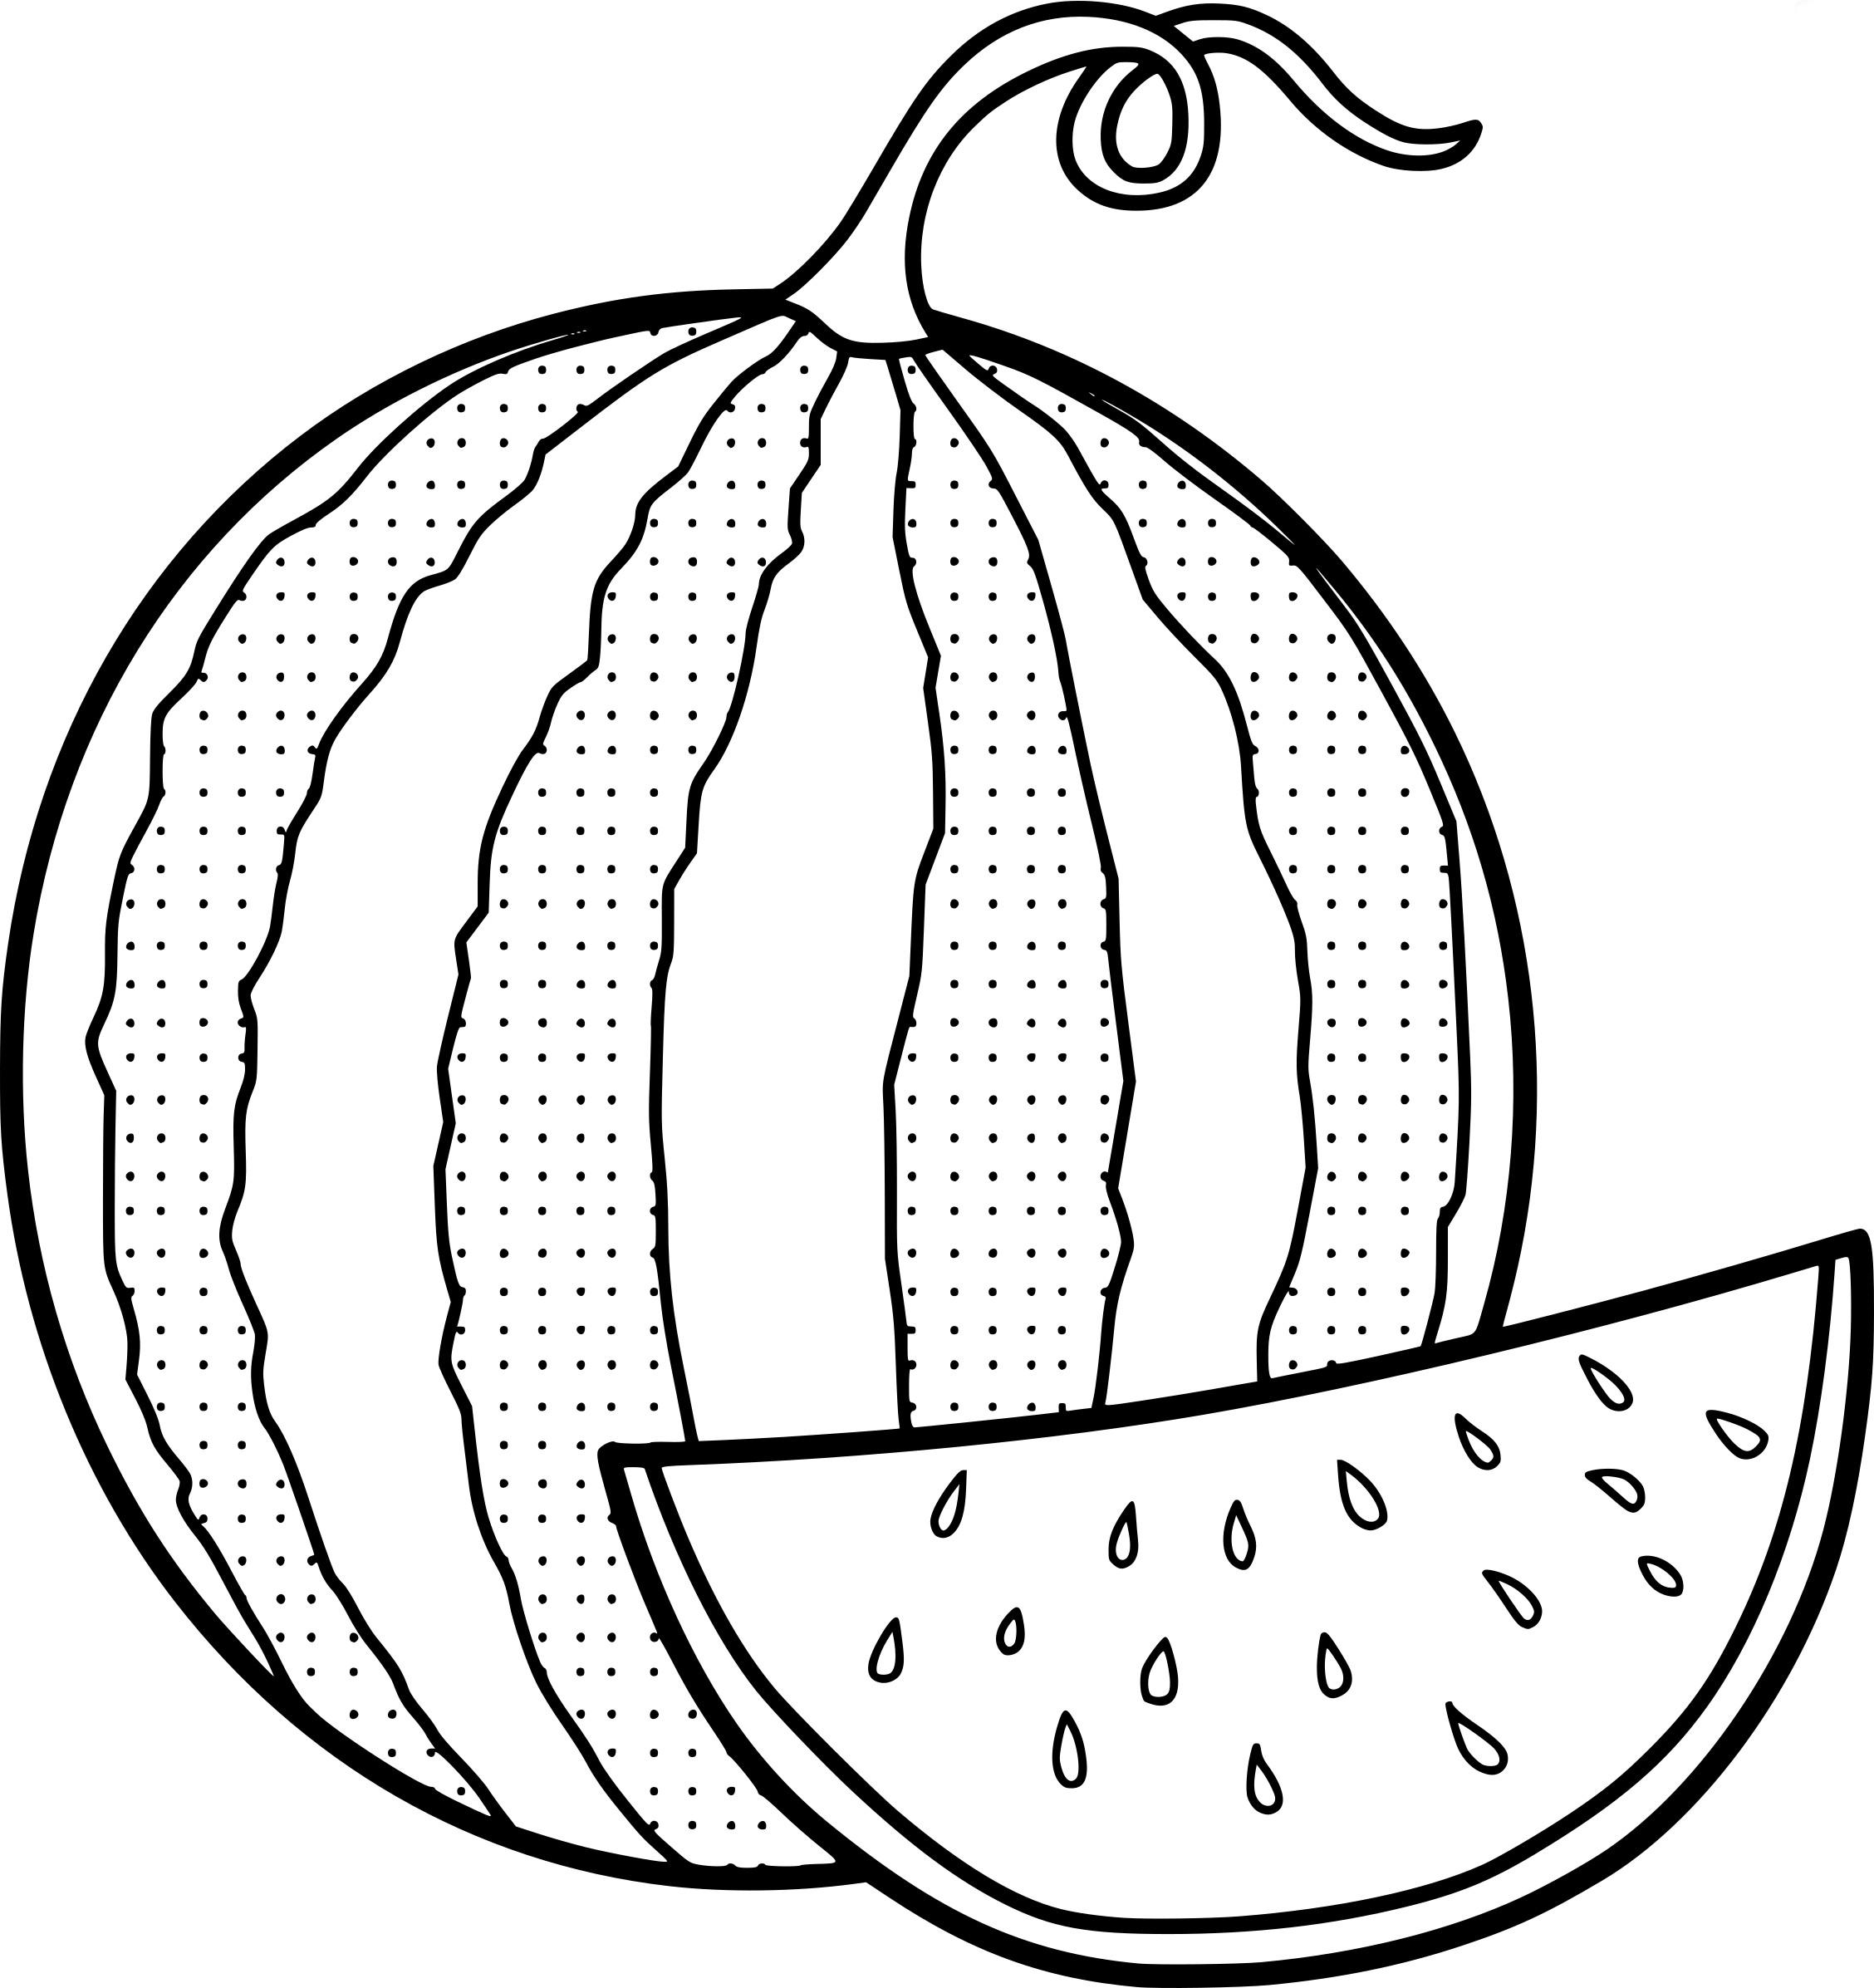 Melon Coloring Pages - Coloring Home